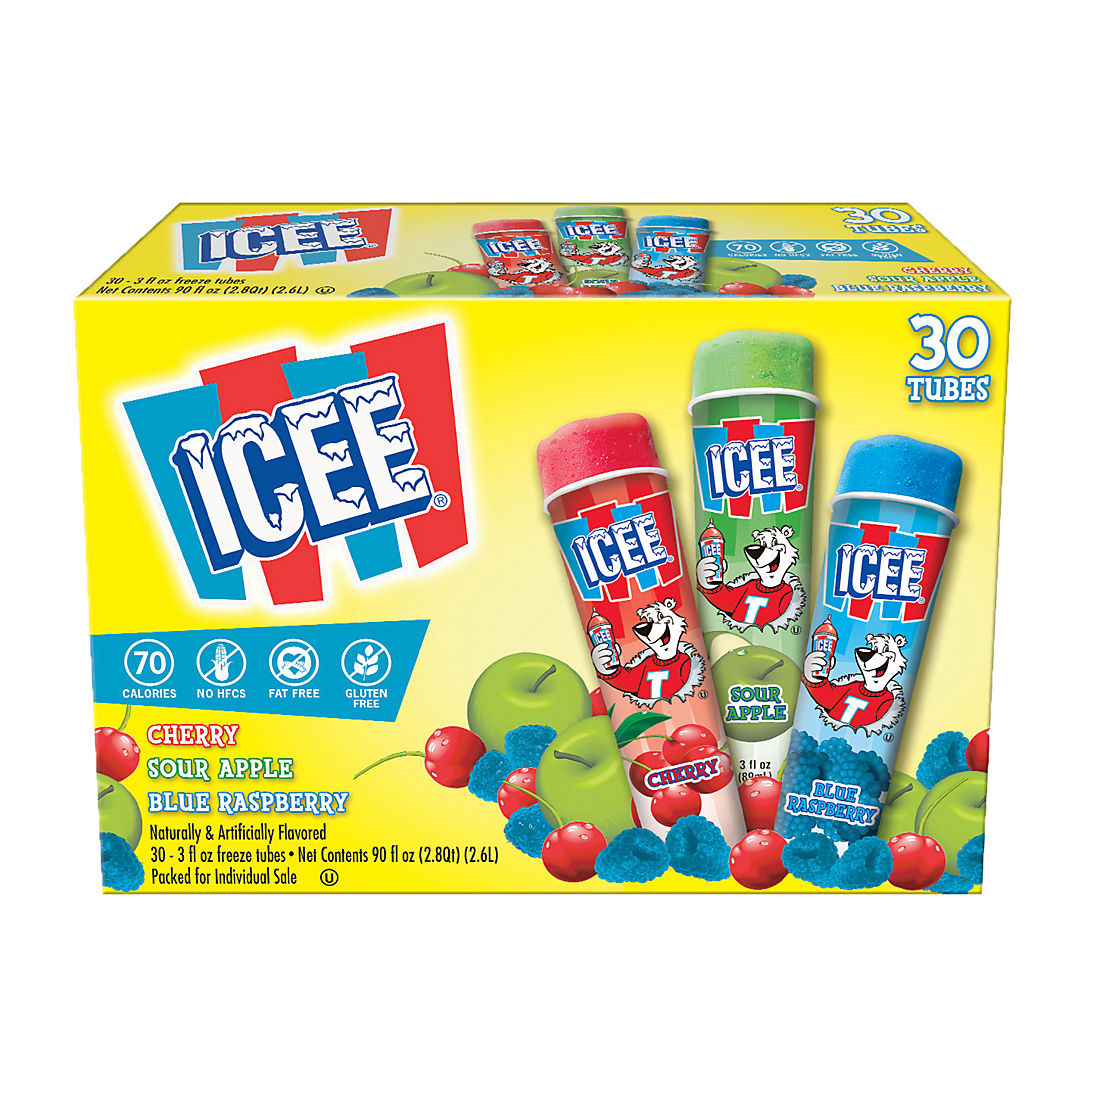 Icee pictures of Which gas